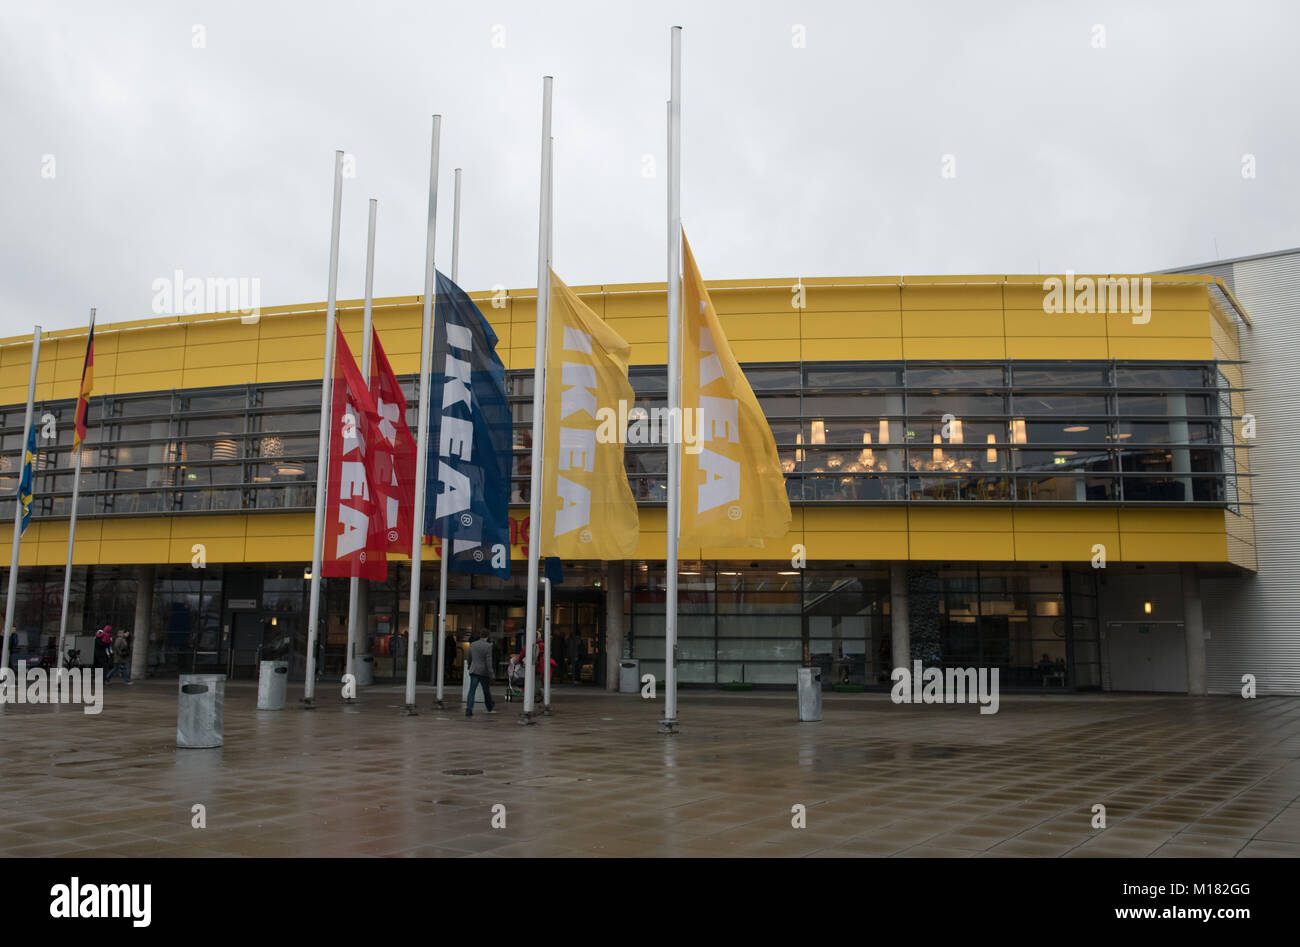 Berlin, Germany. 28th Jan, 2018. The flags in front of Ikea are at half mast after the death of Ikea founder Kamprad, in Berlin, Germany, 28 January 2018. The founder of the Swedish furniture entreprise has passed away at the age of 91, his company said today. He fell asleep peacefully inside his home in the region Smaland. Credit: Paul Zinken/dpa/Alamy Live News Stock Photo